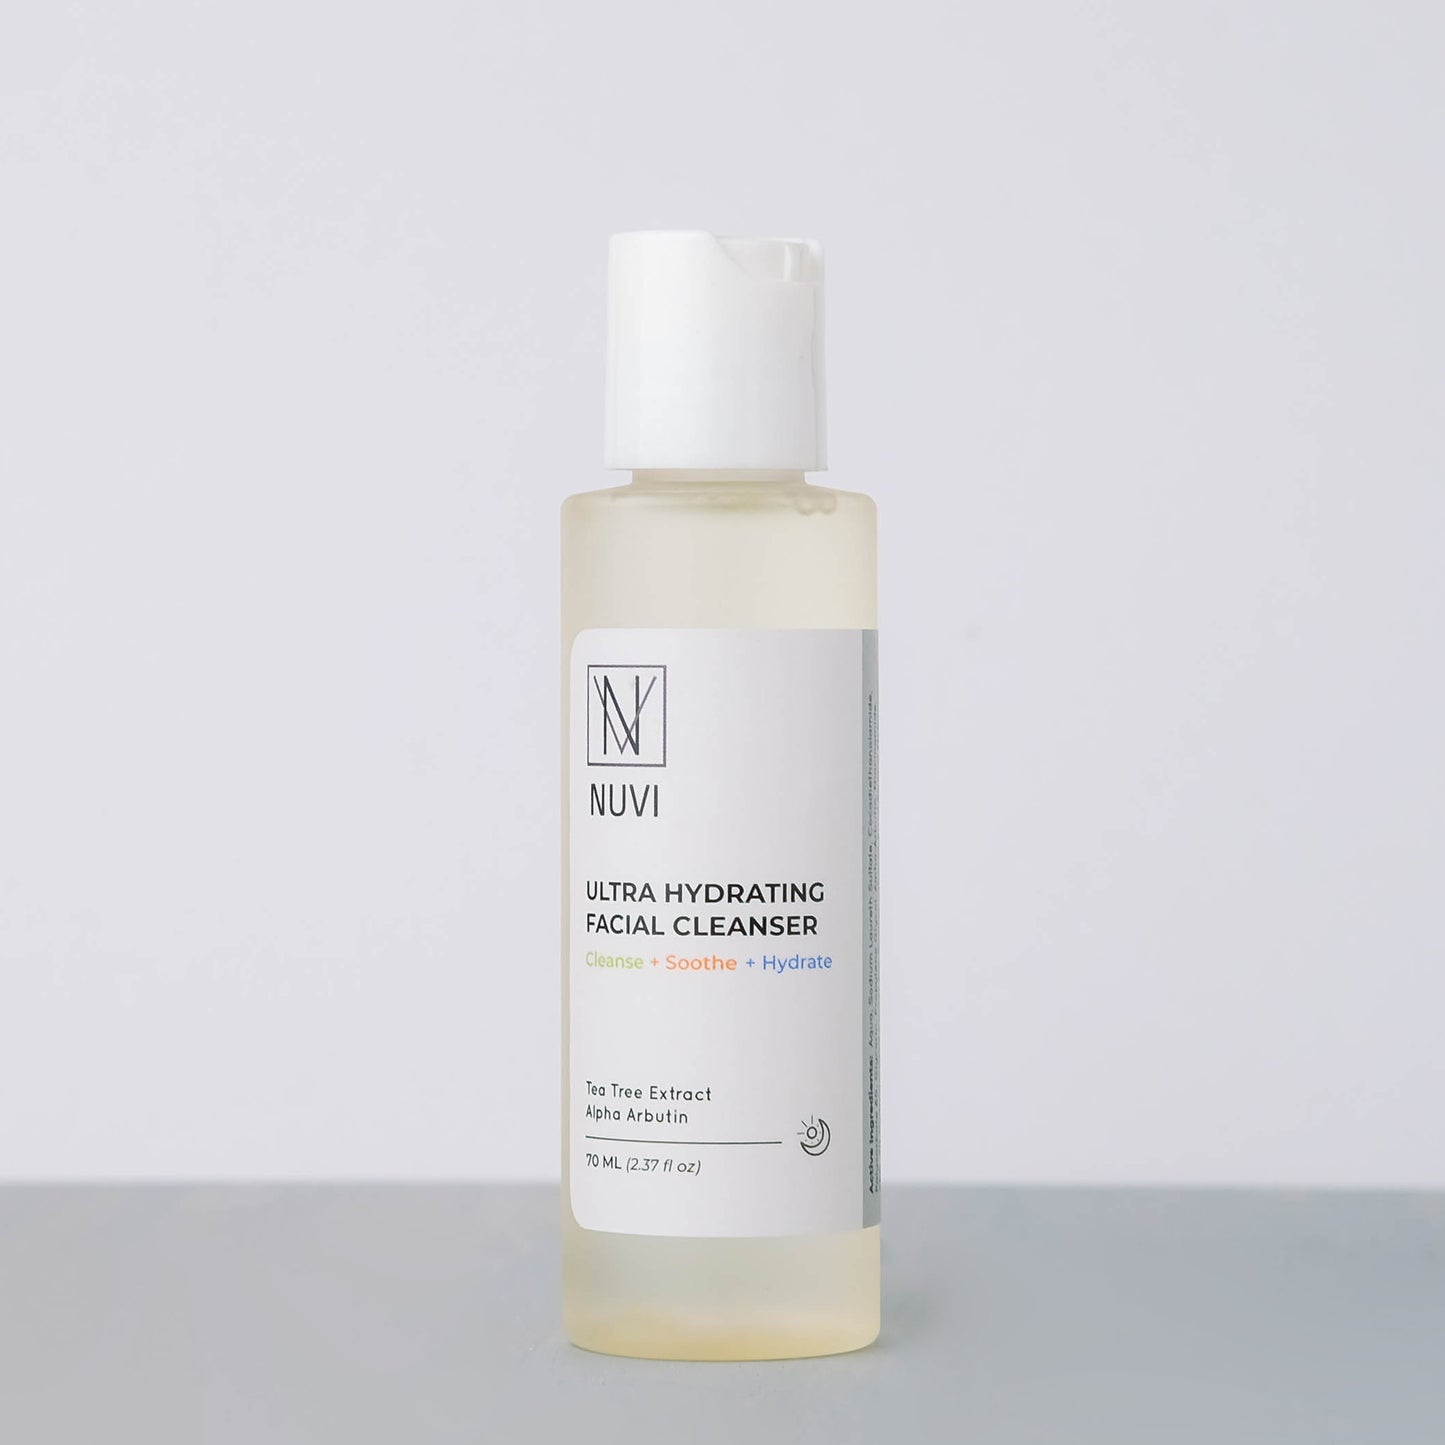 NUVI Ultra Hydrating Facial Cleanser